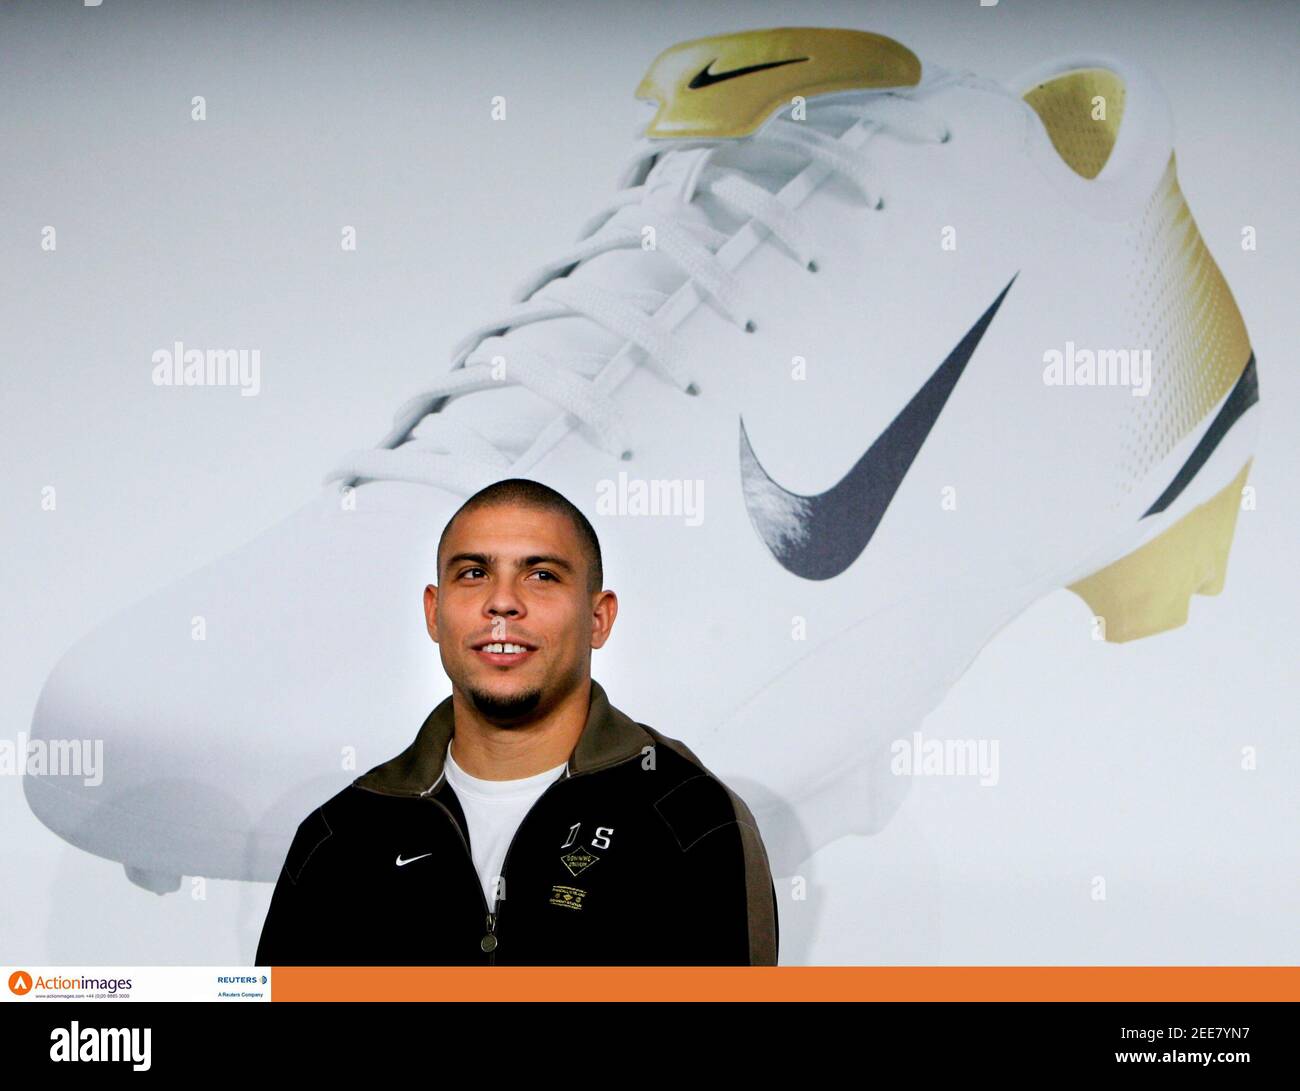 Action Images - Ronaldo - Nike - Launch of Mercurial Vapor III Boot -  Allianz Arena, Munich, Germany - 9/1/06 Real Madrid's Brazilian star  Ronaldo sits in front of a placard of